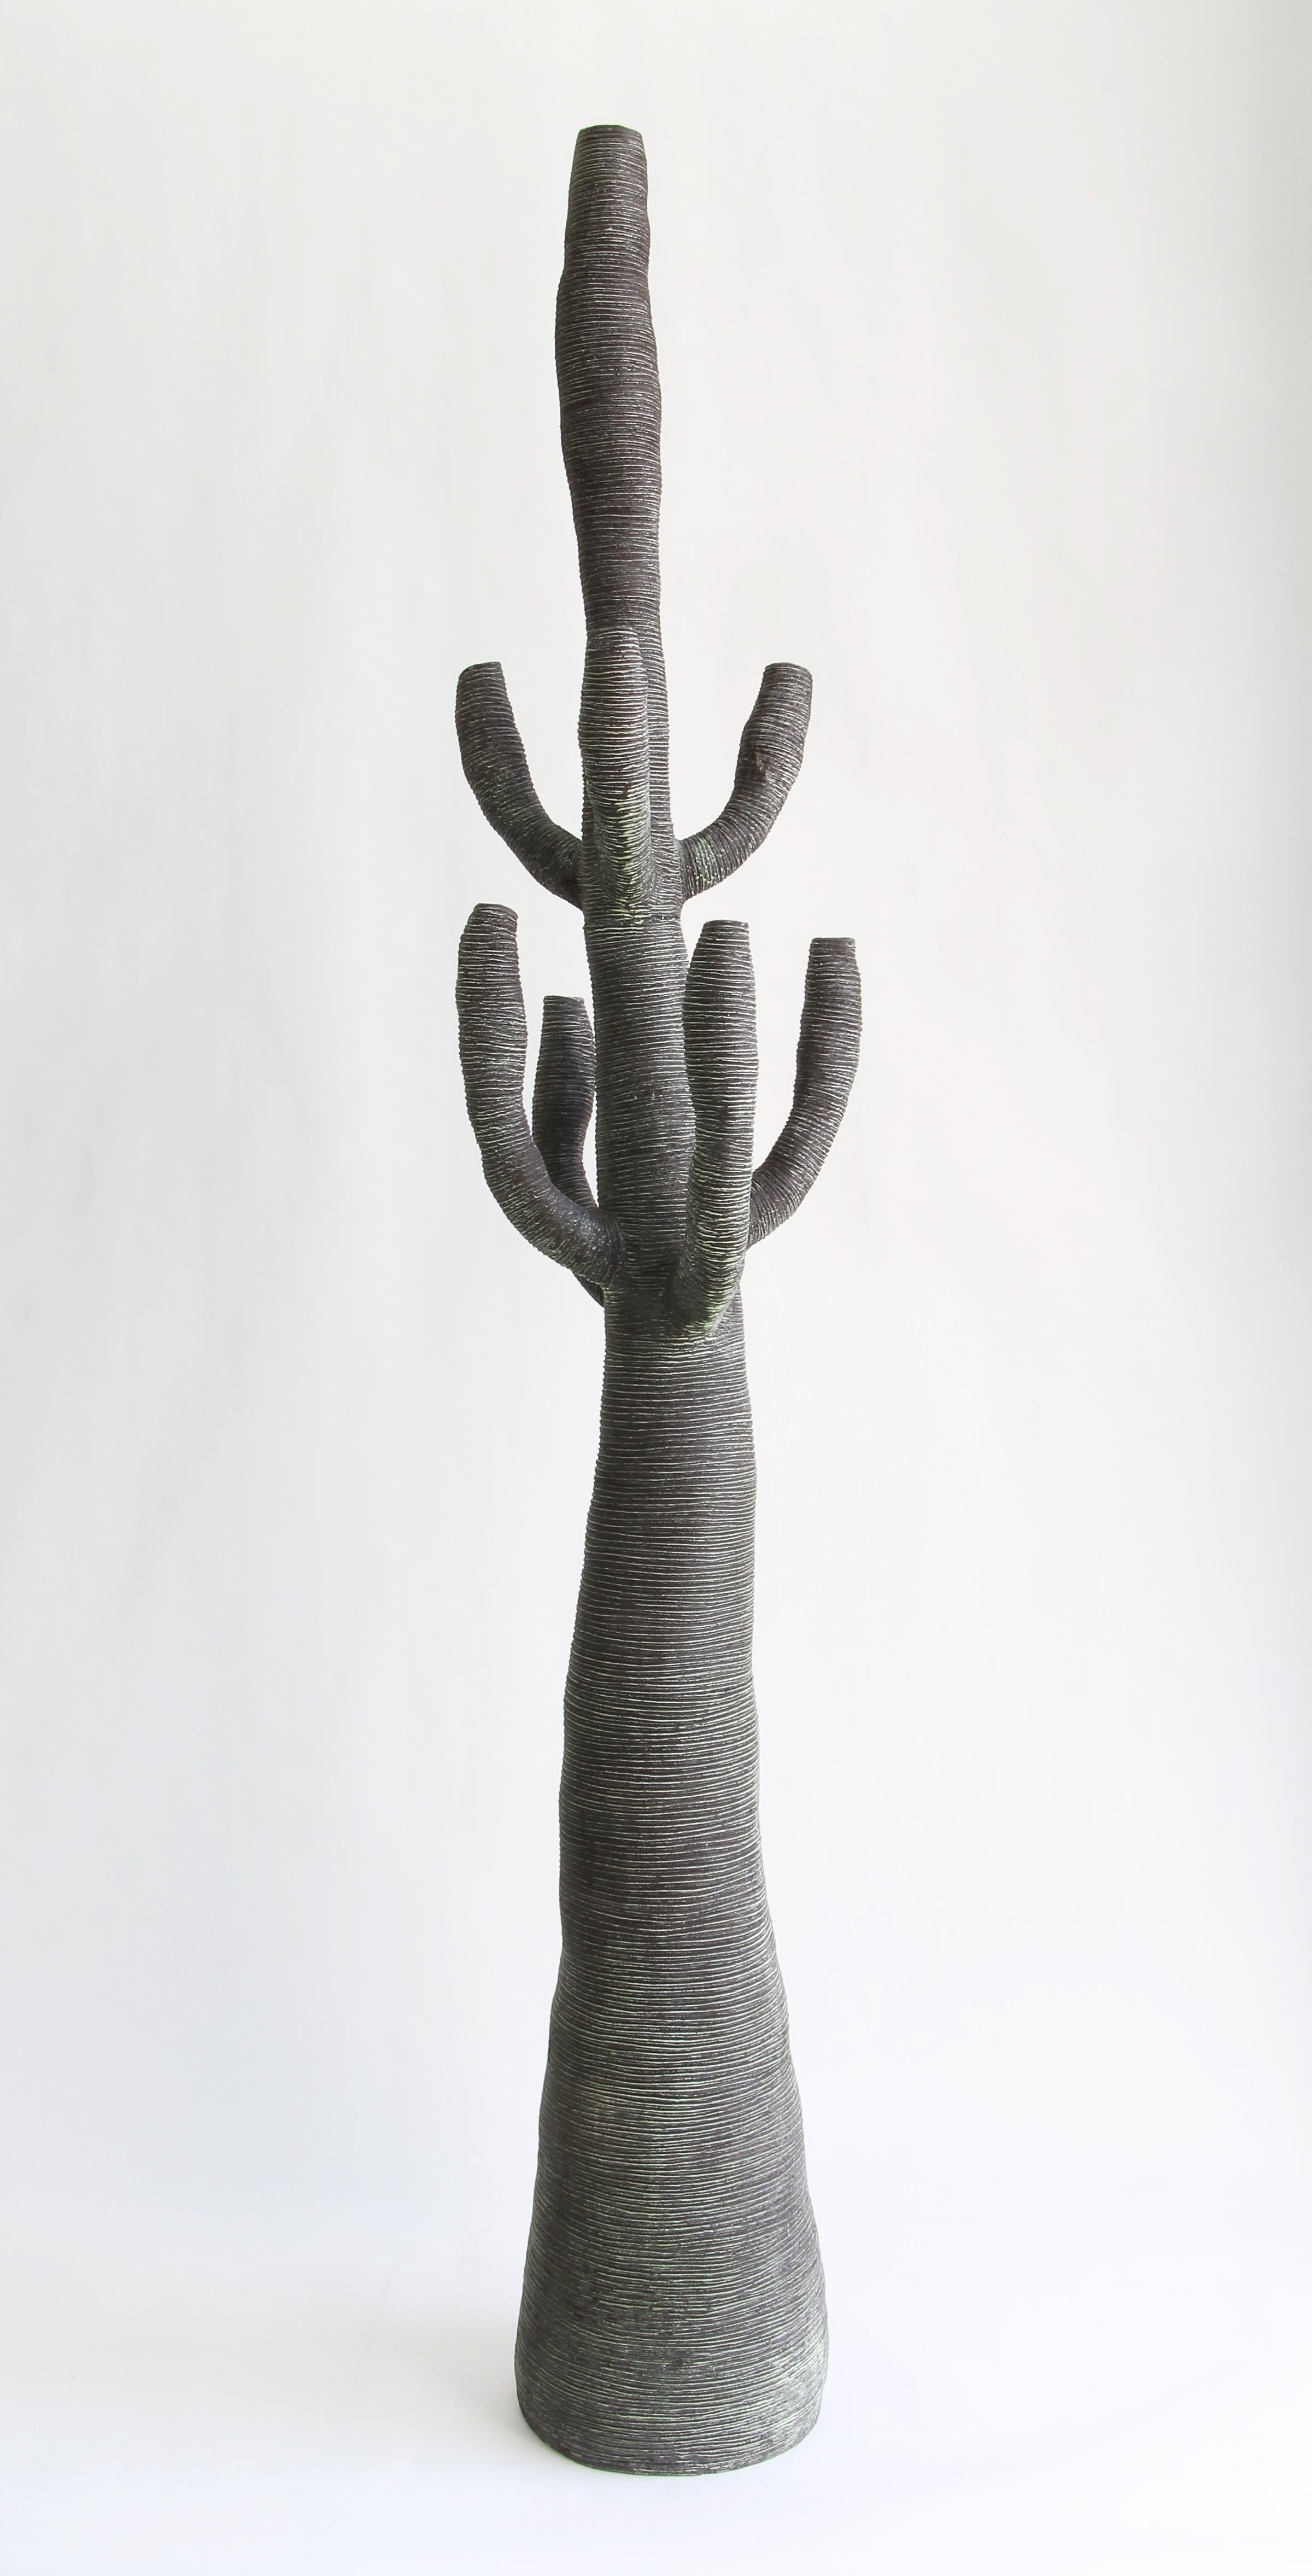 Large green ceramic cactus created by Julie Bergeron. The organic forms and rich textures express the intense beauty of nature in all its irregularity. Rich variations in color, from deep brown or black to pale green highlights, vibrate with the